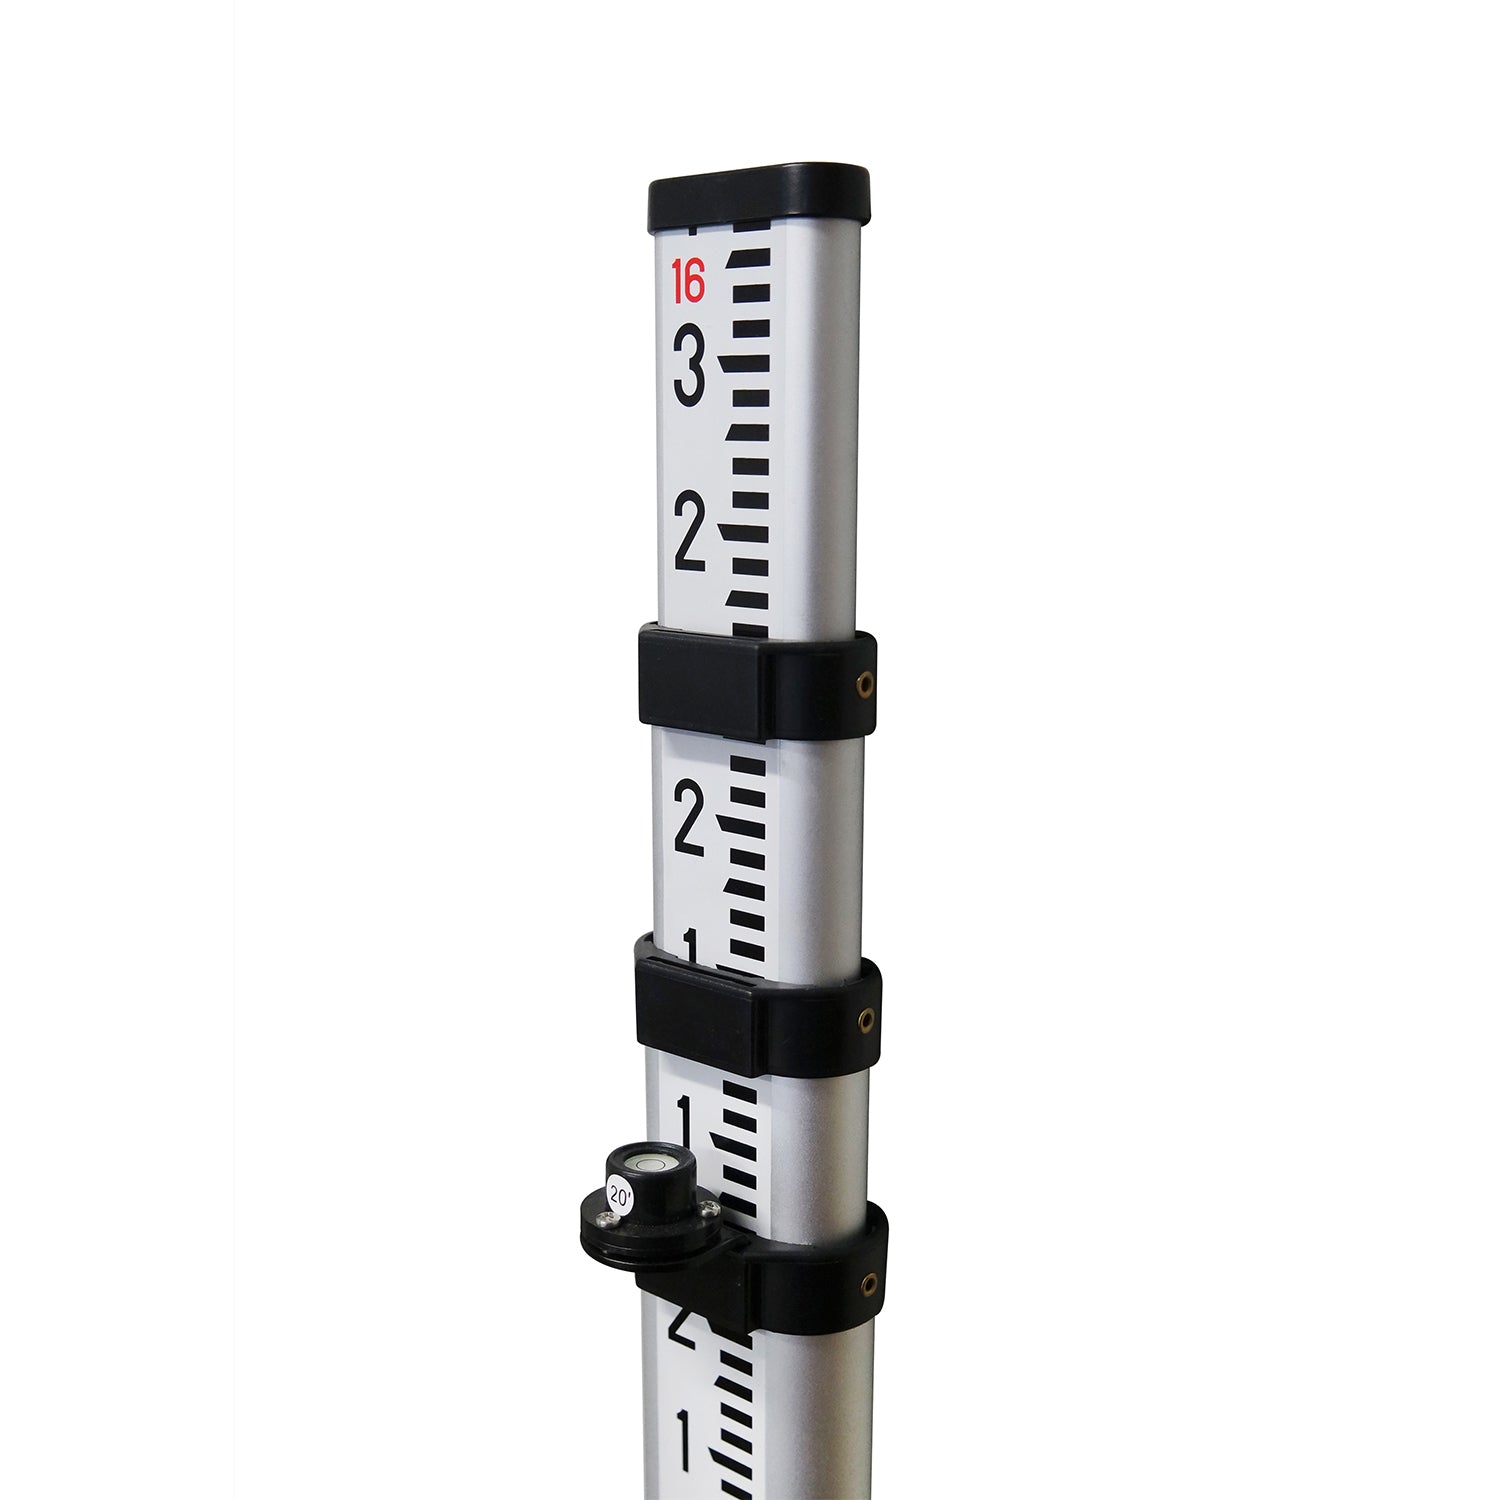 GeoMax 16.4 ft Dual Face Telescopic Level Pole (Ft, 10ths, 100ths) -Rods, Poles & Accessories- eGPS Solutions Inc.